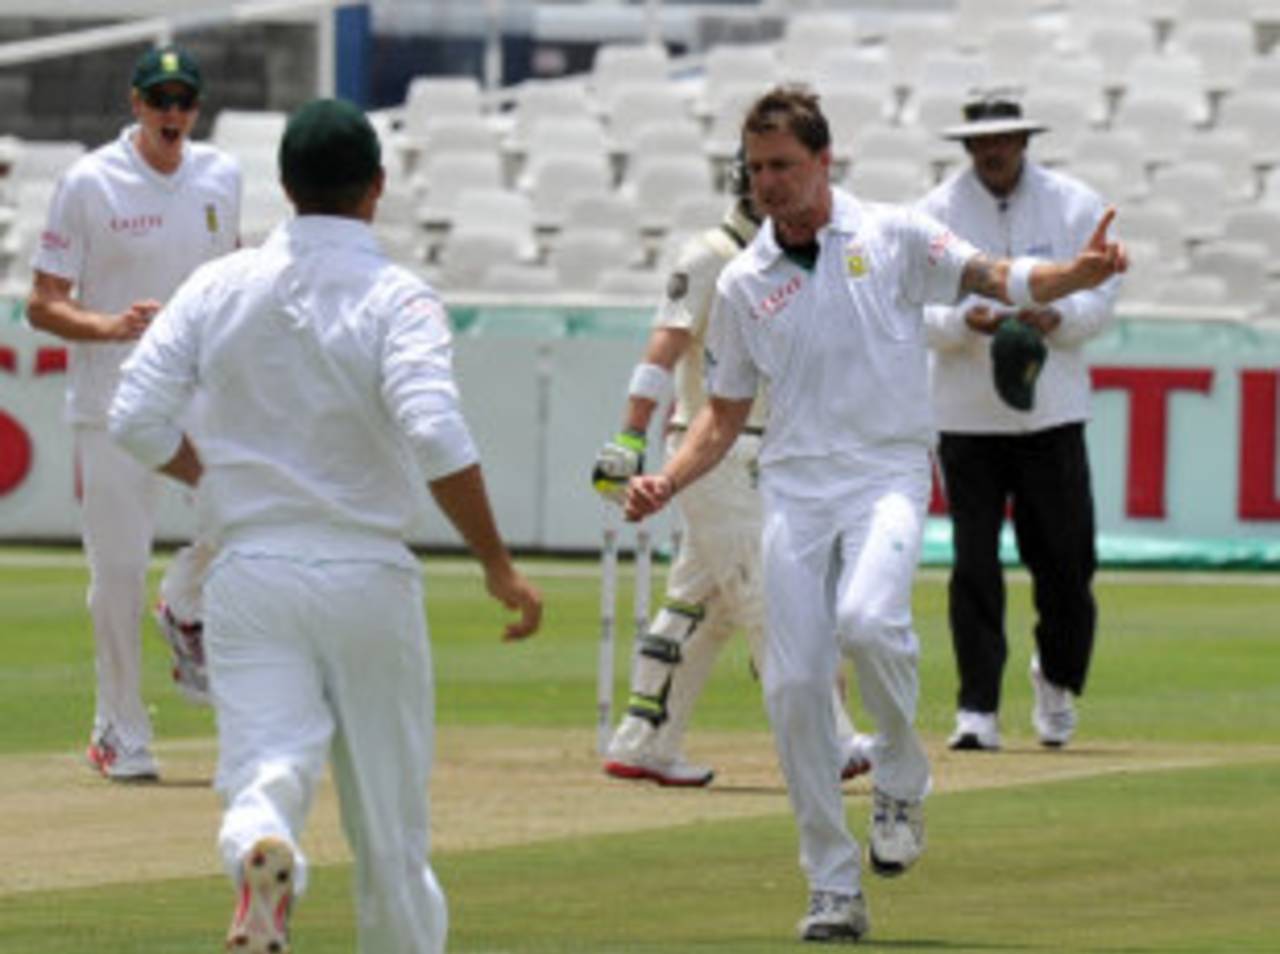 Dale Steyn is pumped up after dismissing Shane Watson, South Africa v Australia, 1st Test, Cape Town, 1st day, November 9, 2011